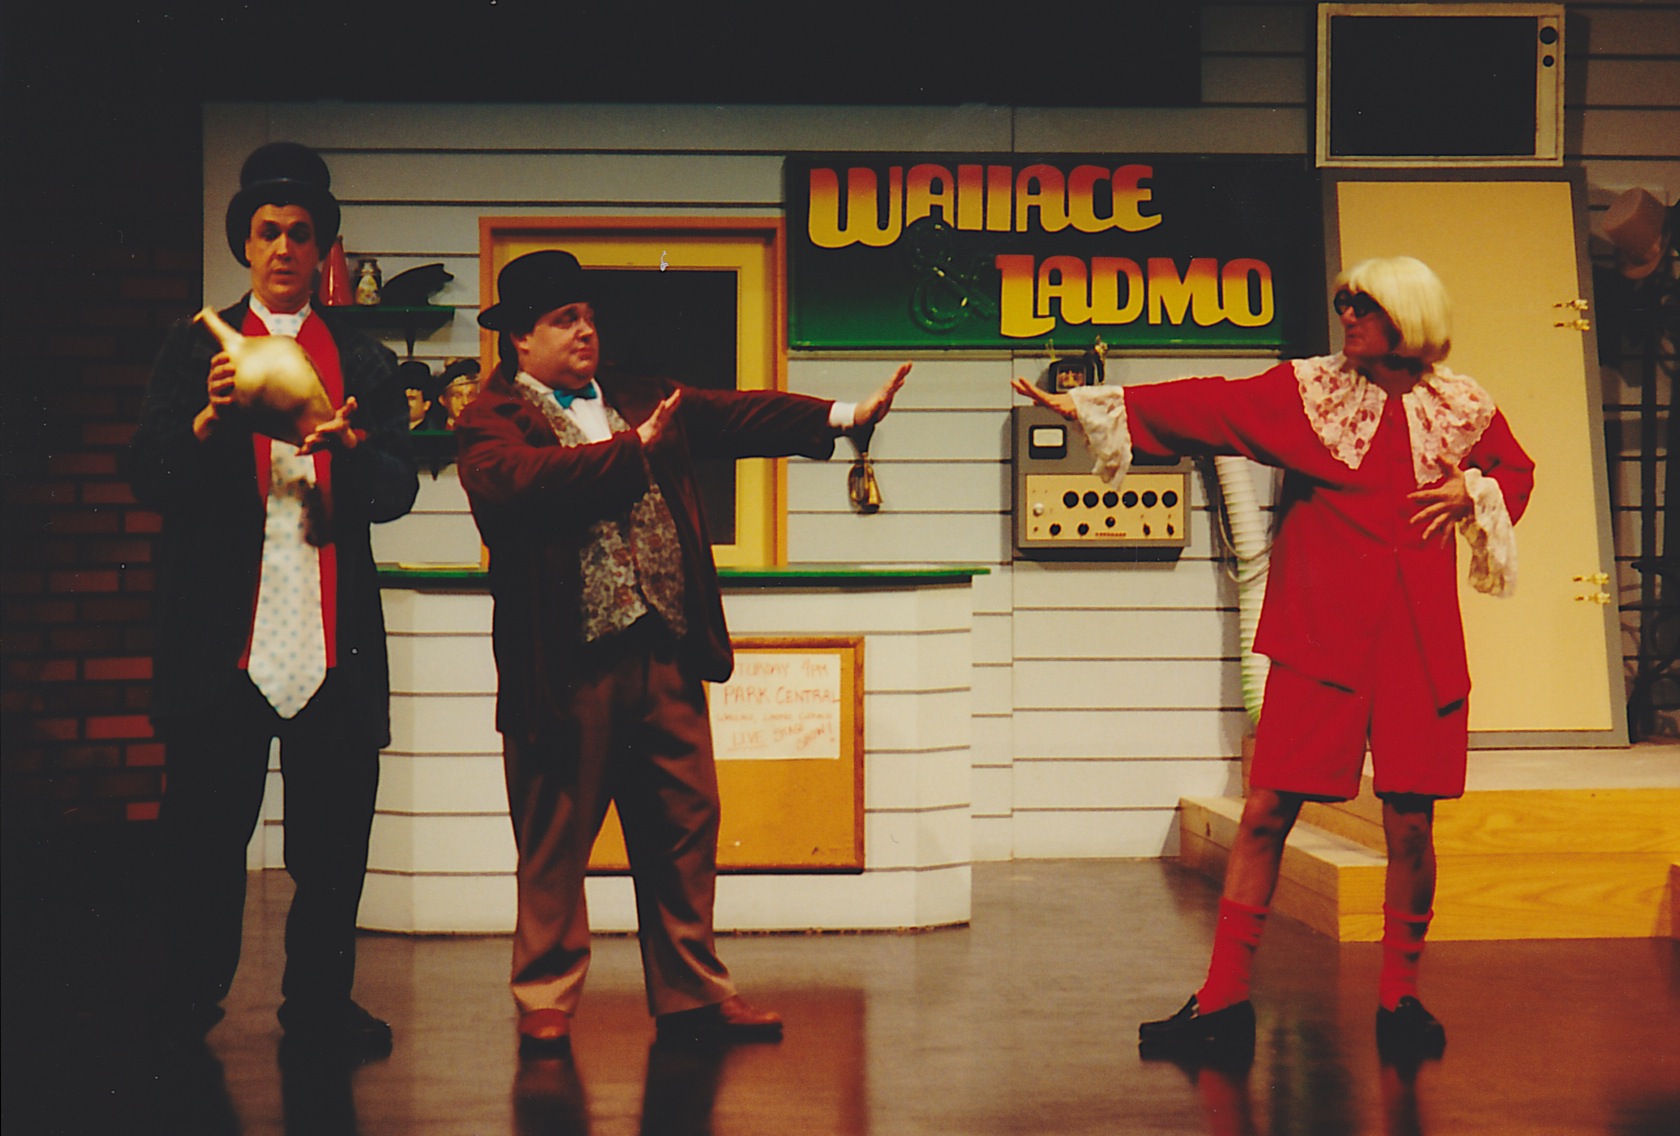 Hamilton Mitchell is Ladmo, Wes Marin is Wallace and Bob Sorenson is Gerald in Ben Tyler's "The Wallace and Ladmo Show" (2000) at Desert Foothills Theatre. (Photo Credit Unknown) 